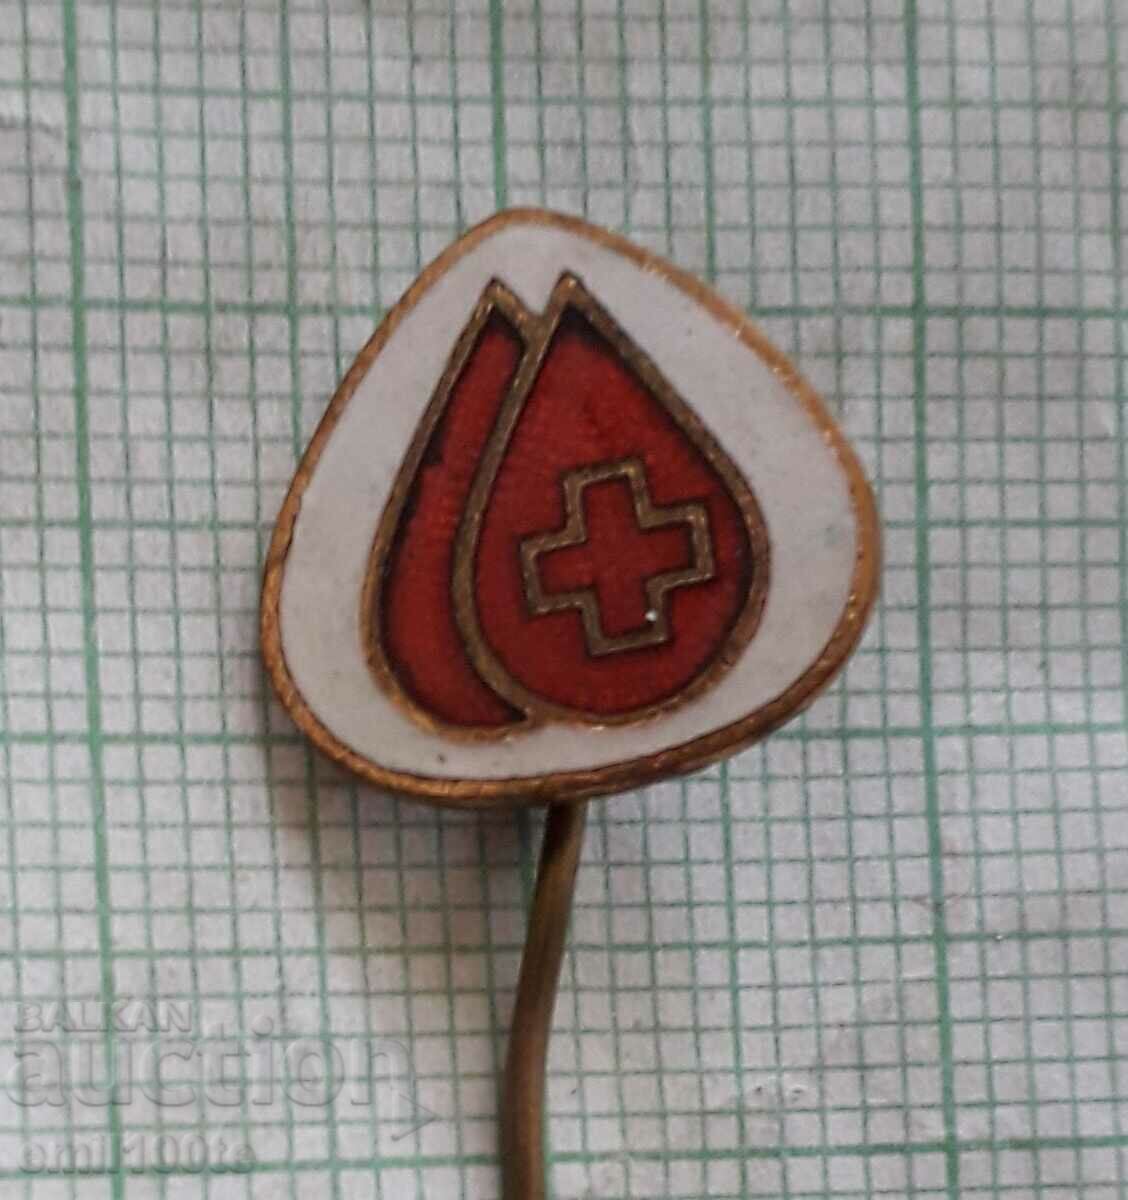 Blood Donor Badge